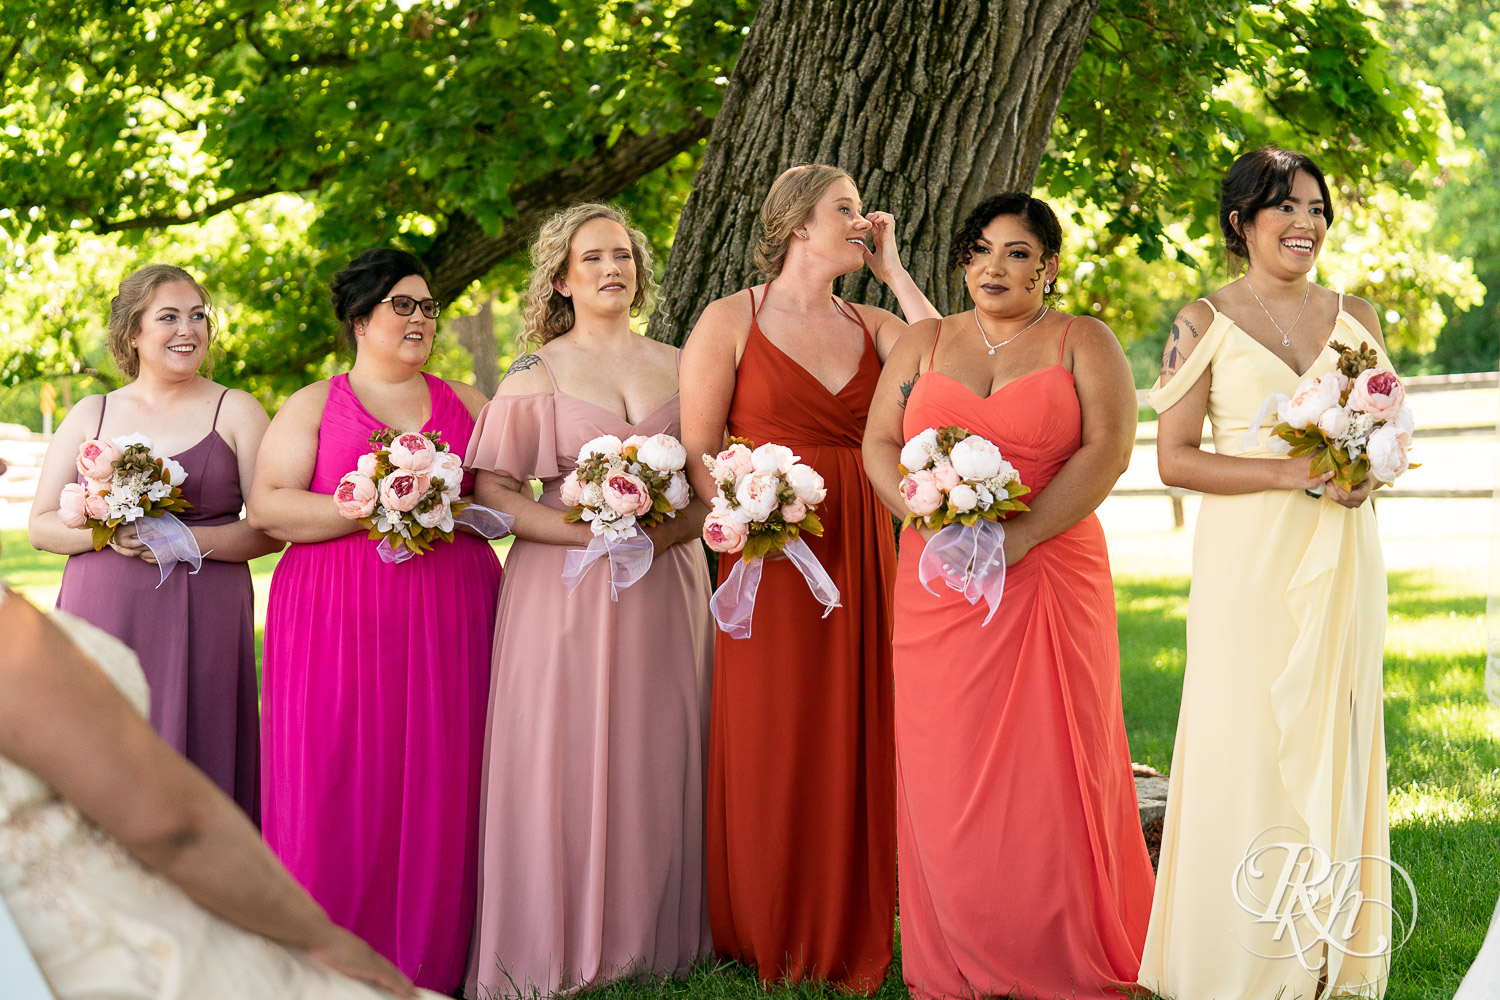 Bridesmaid cry and smile during wedding ceremony at Mayowood Stone Barn in Rochester, Minnesota.